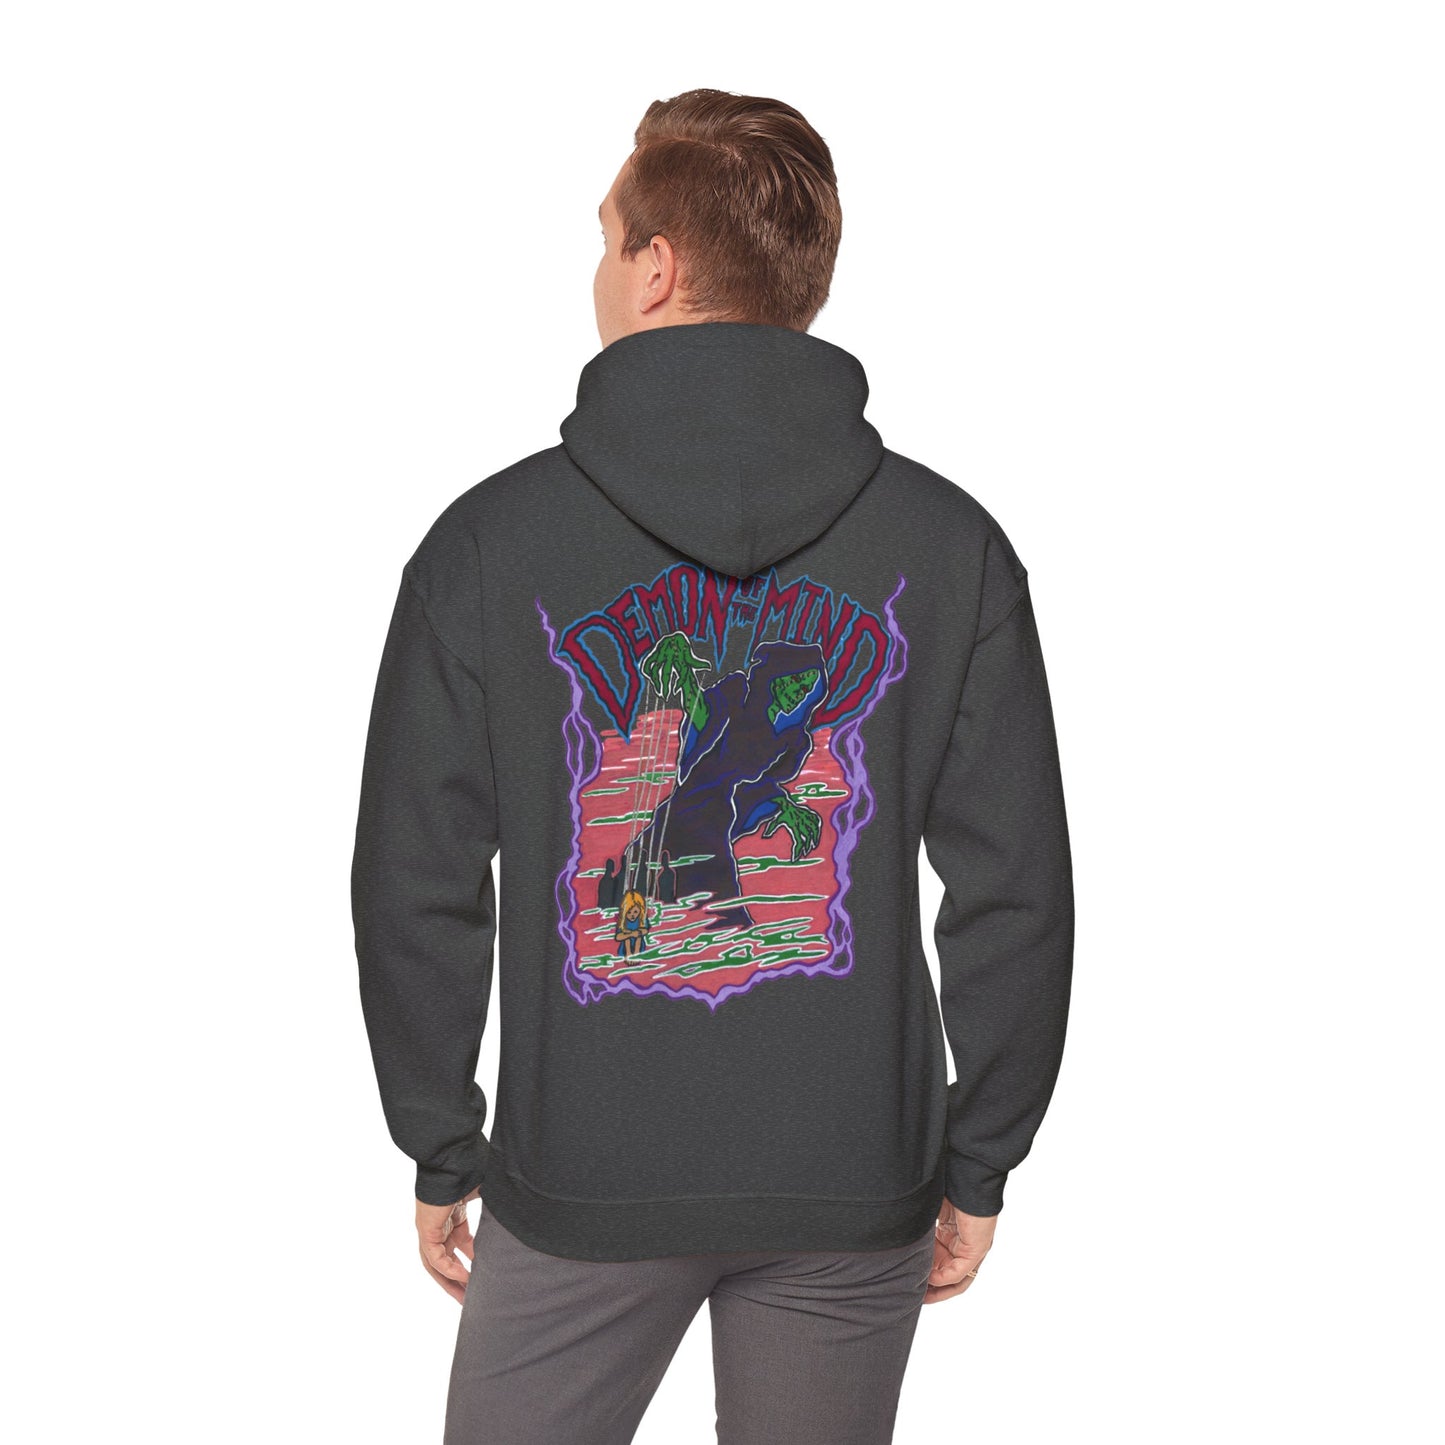 Demond Of The Mind Hoodie by Trophy Husband